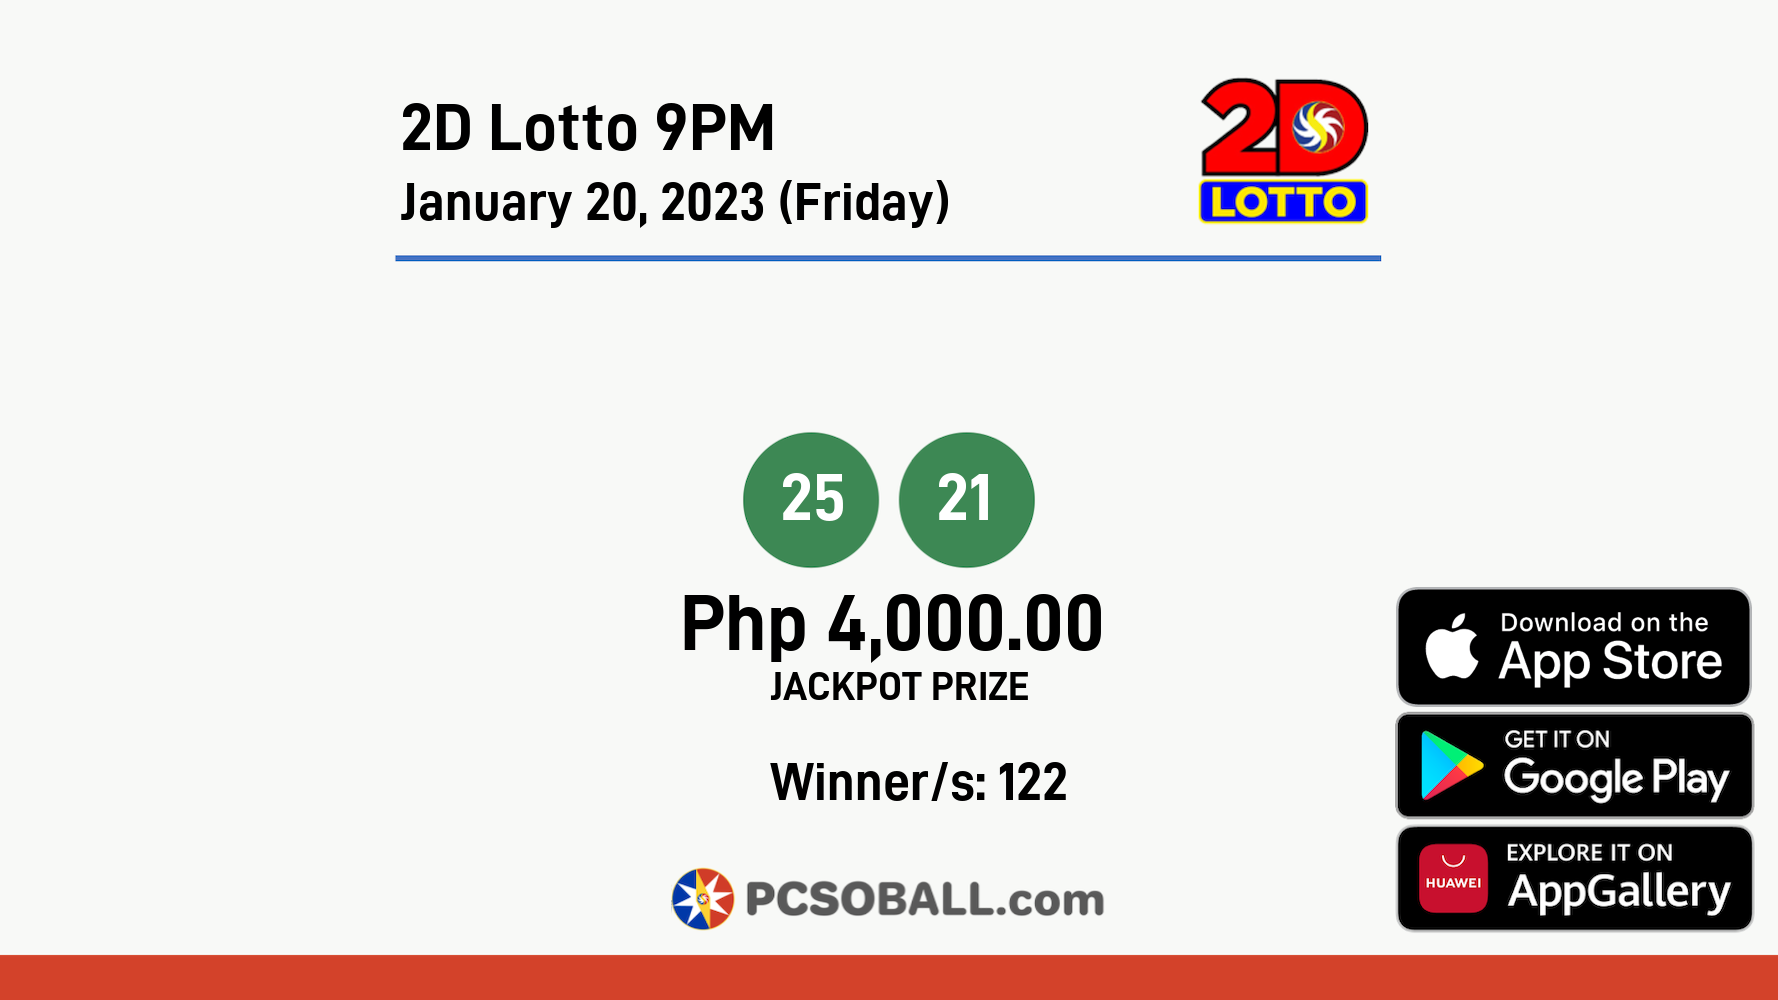 2D Lotto 9PM January 20, 2023 (Friday) Result